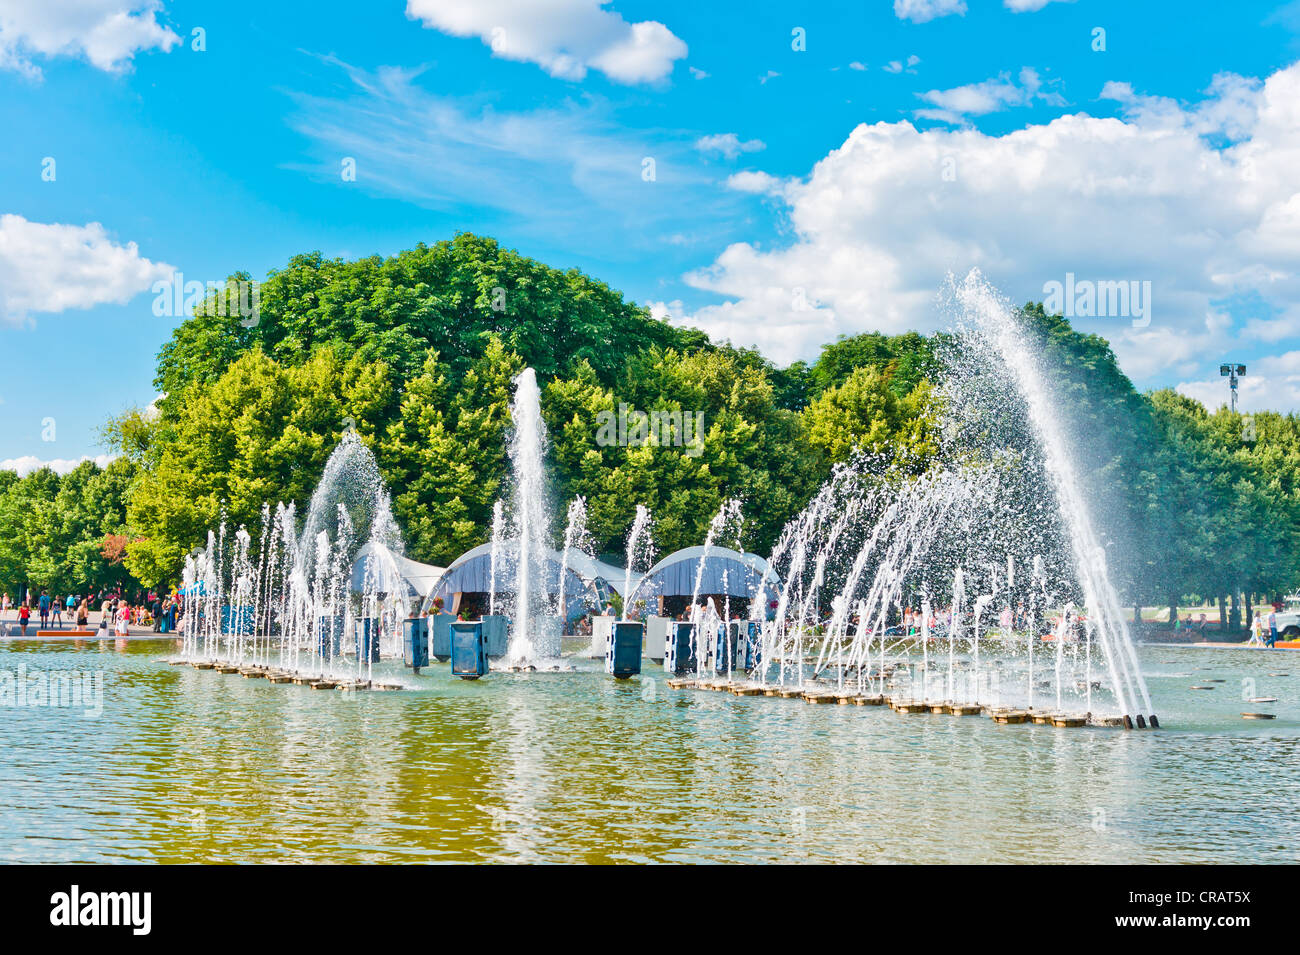 Fountain in Gorky Park, Moscow Stock Photo